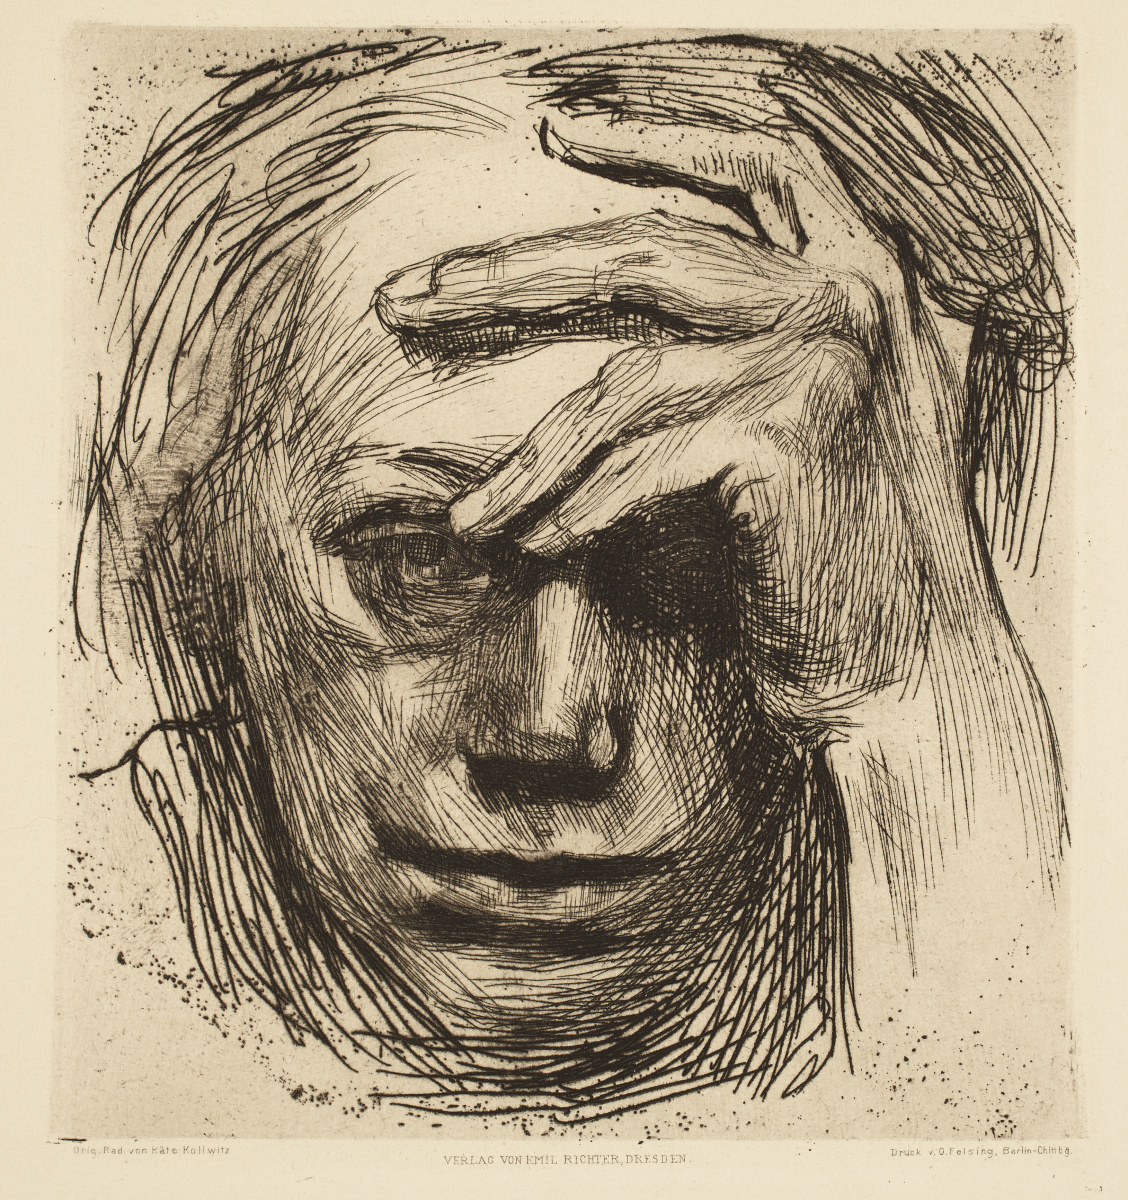 A close-up drawing of a woman's forlorn face, titled "Self-portrait with hand to forehead" by Kathe Kollwitz.